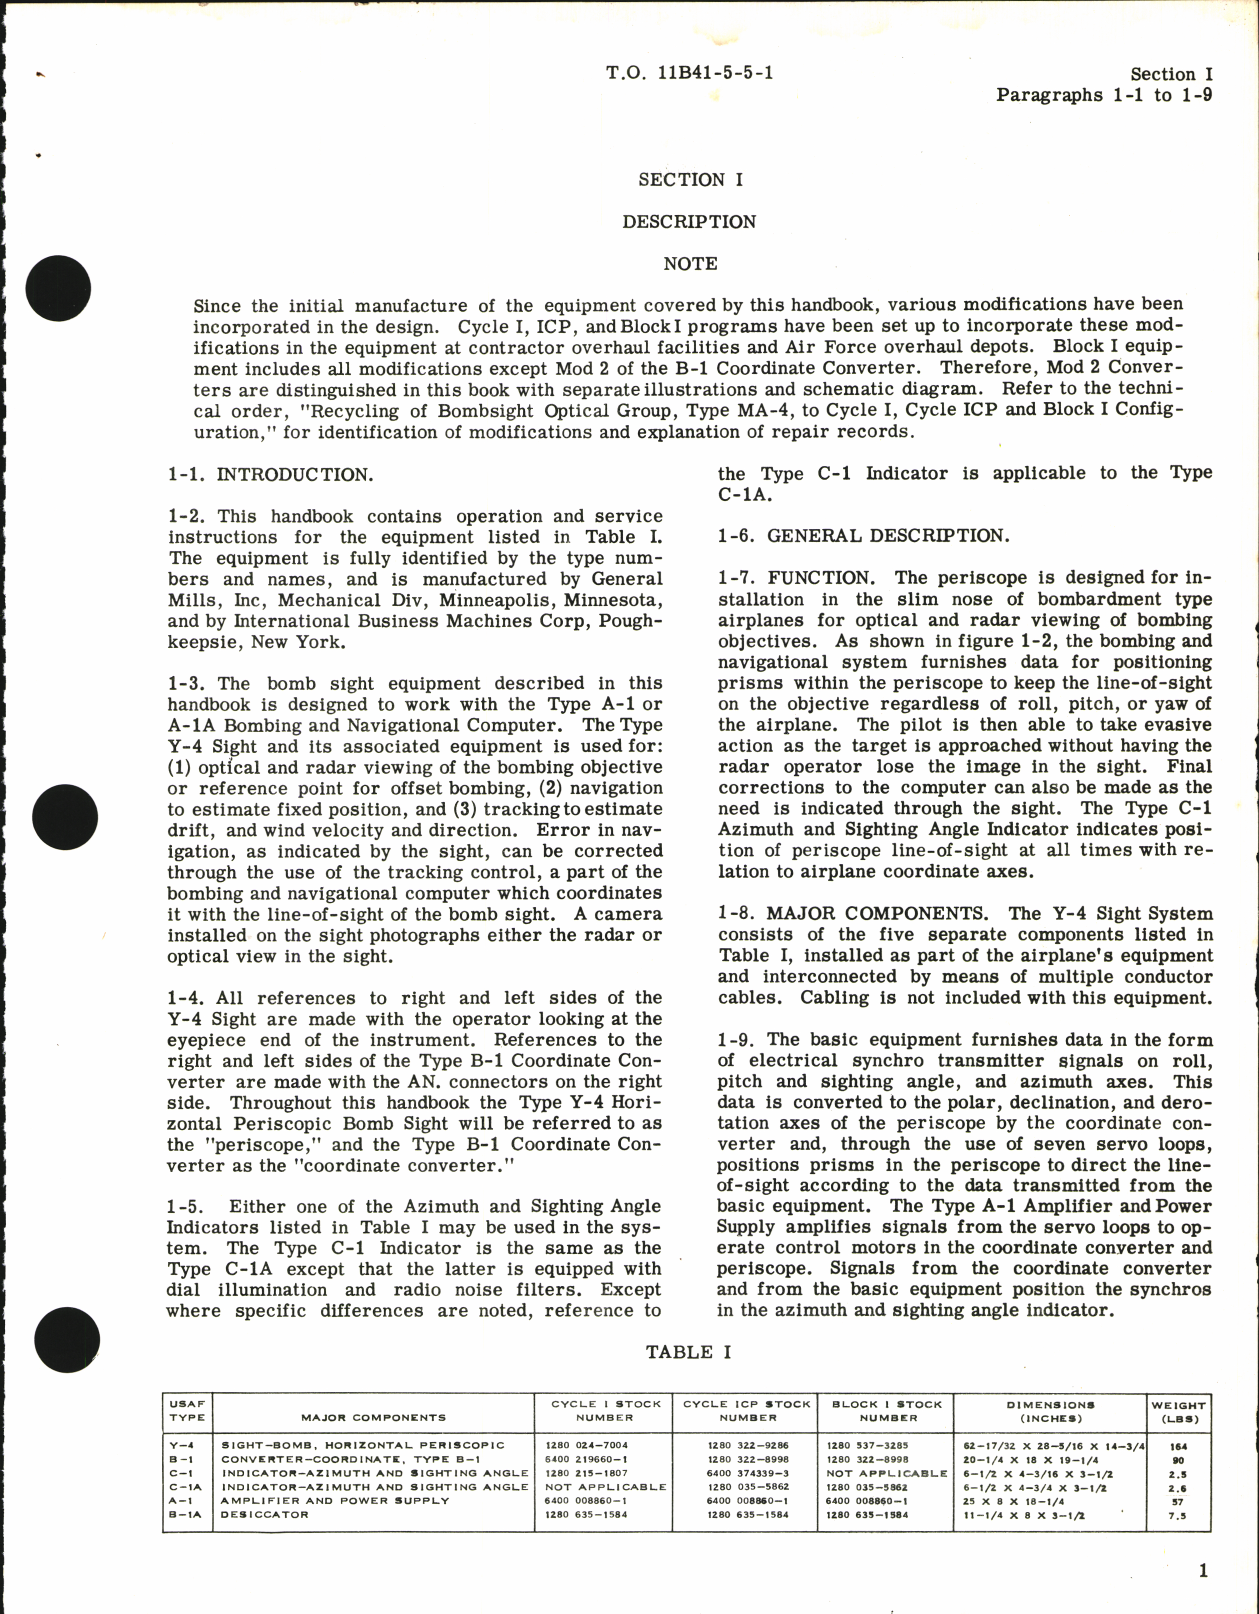 Sample page 5 from AirCorps Library document: Operation and Service Instructions for Type Y-4 Horizontal Periscopic Bombsight